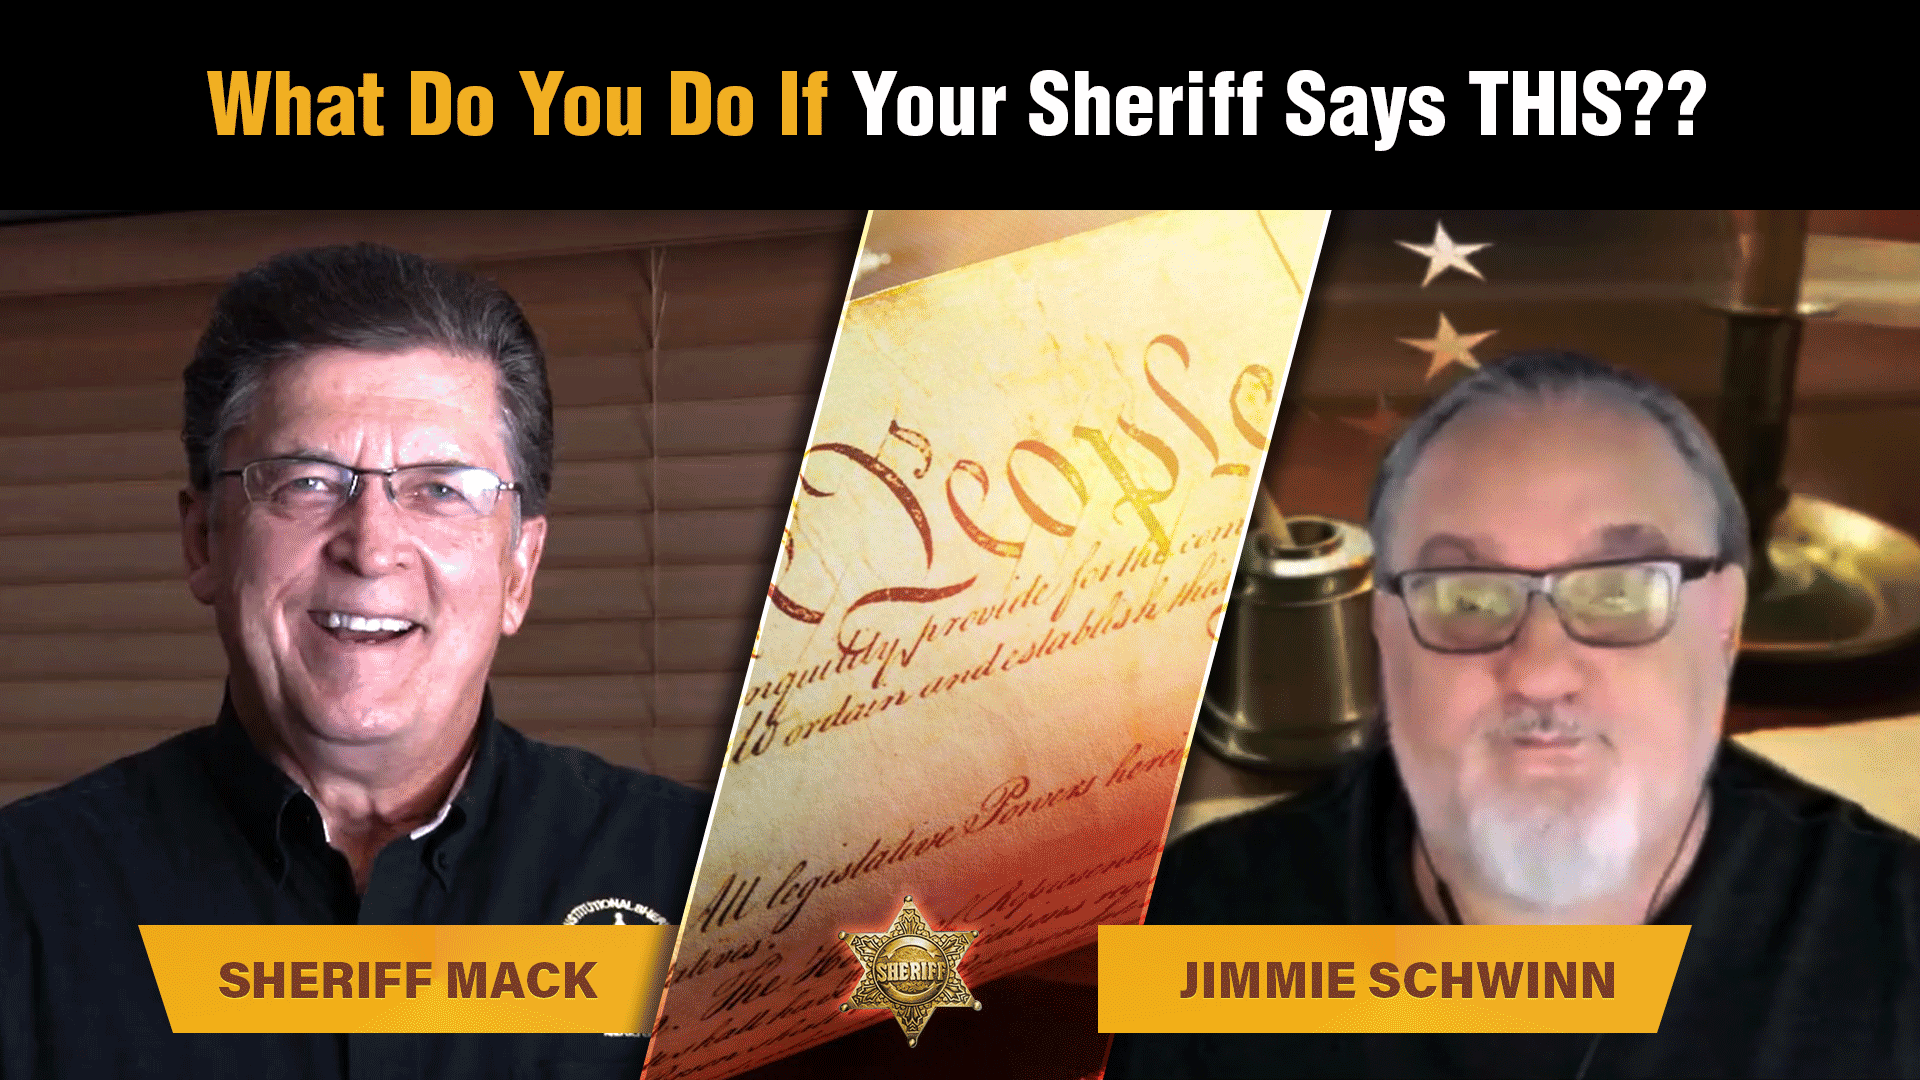 Sheriff Mack talks about some of the questions you can ask your sheriff